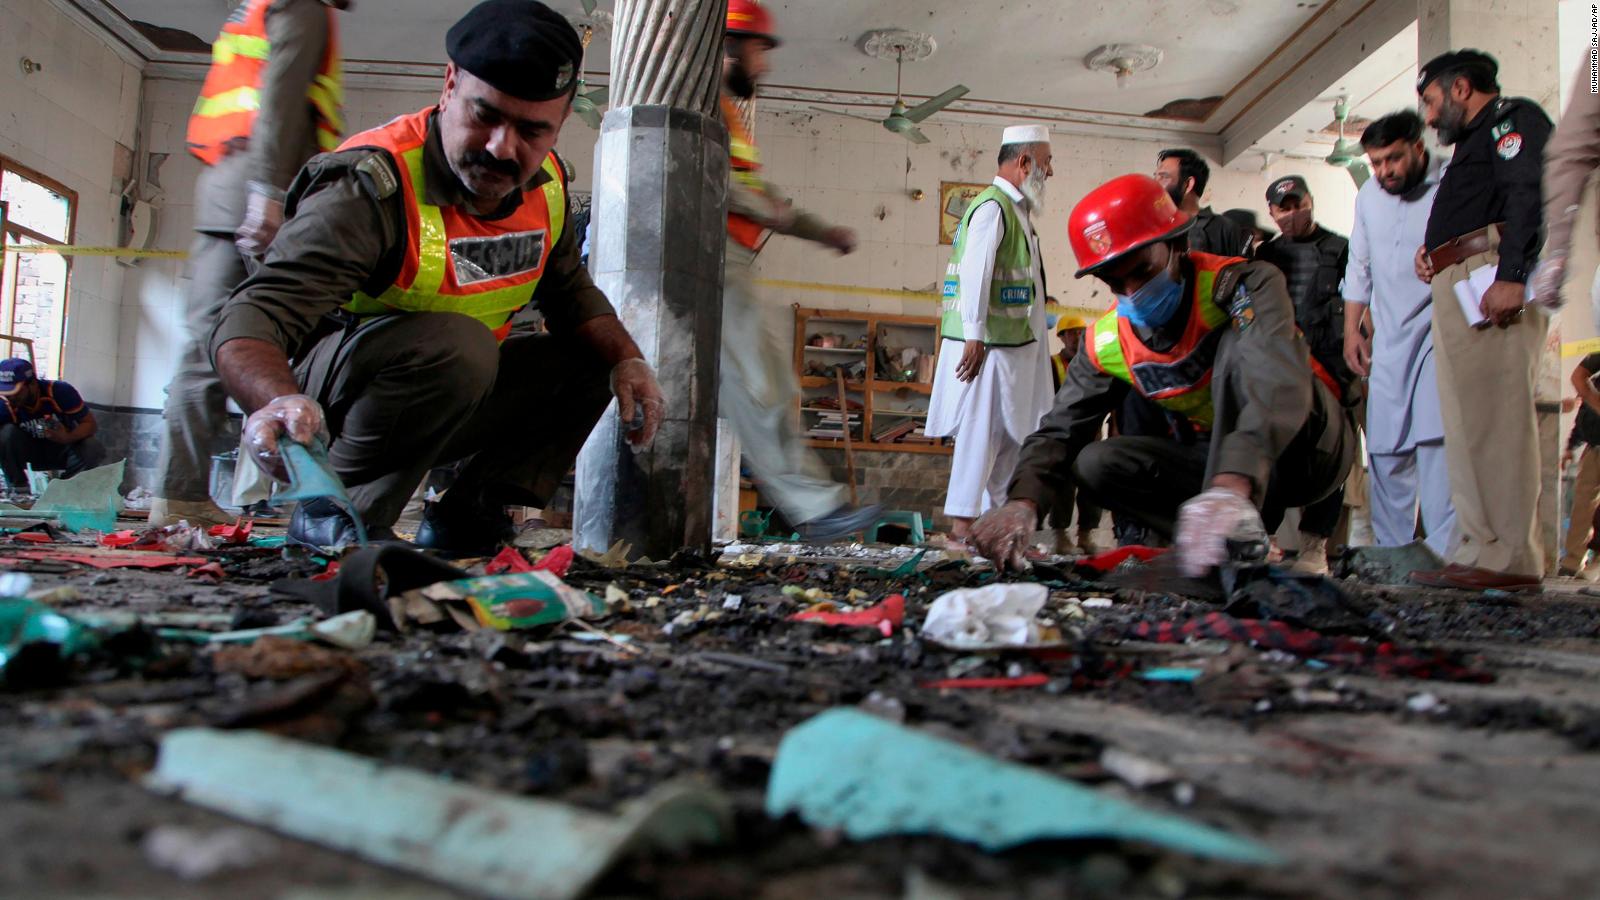 Pakistan Blast At Least 7 Dead After Blast At Religious School In